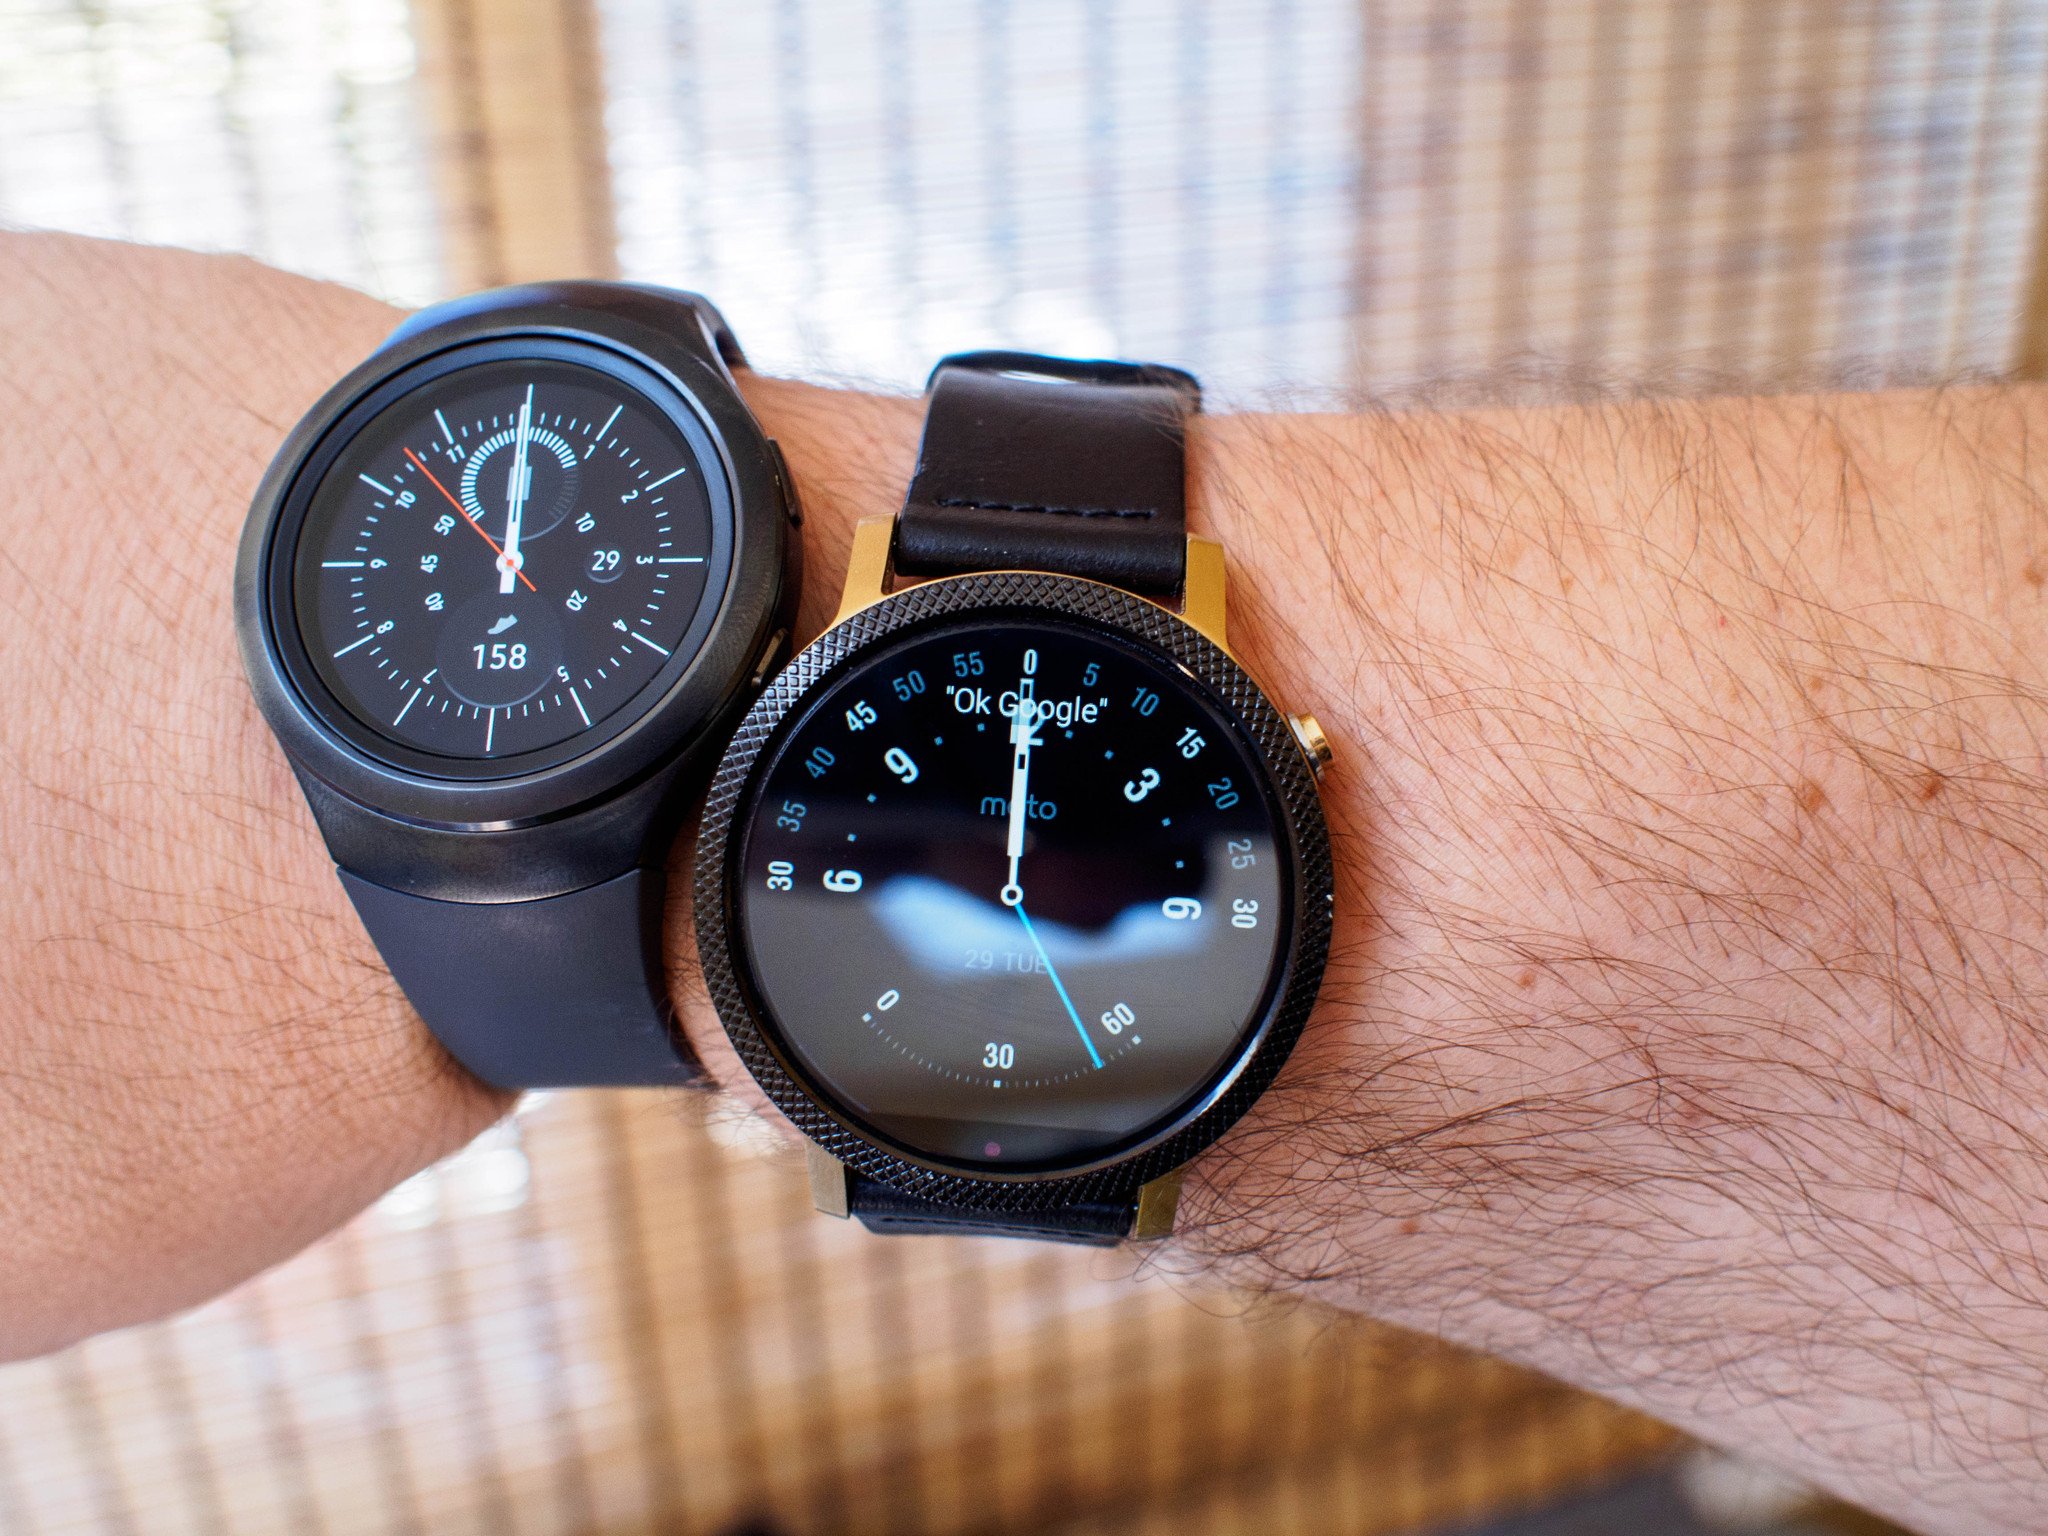 Android Wear with the Gear S2